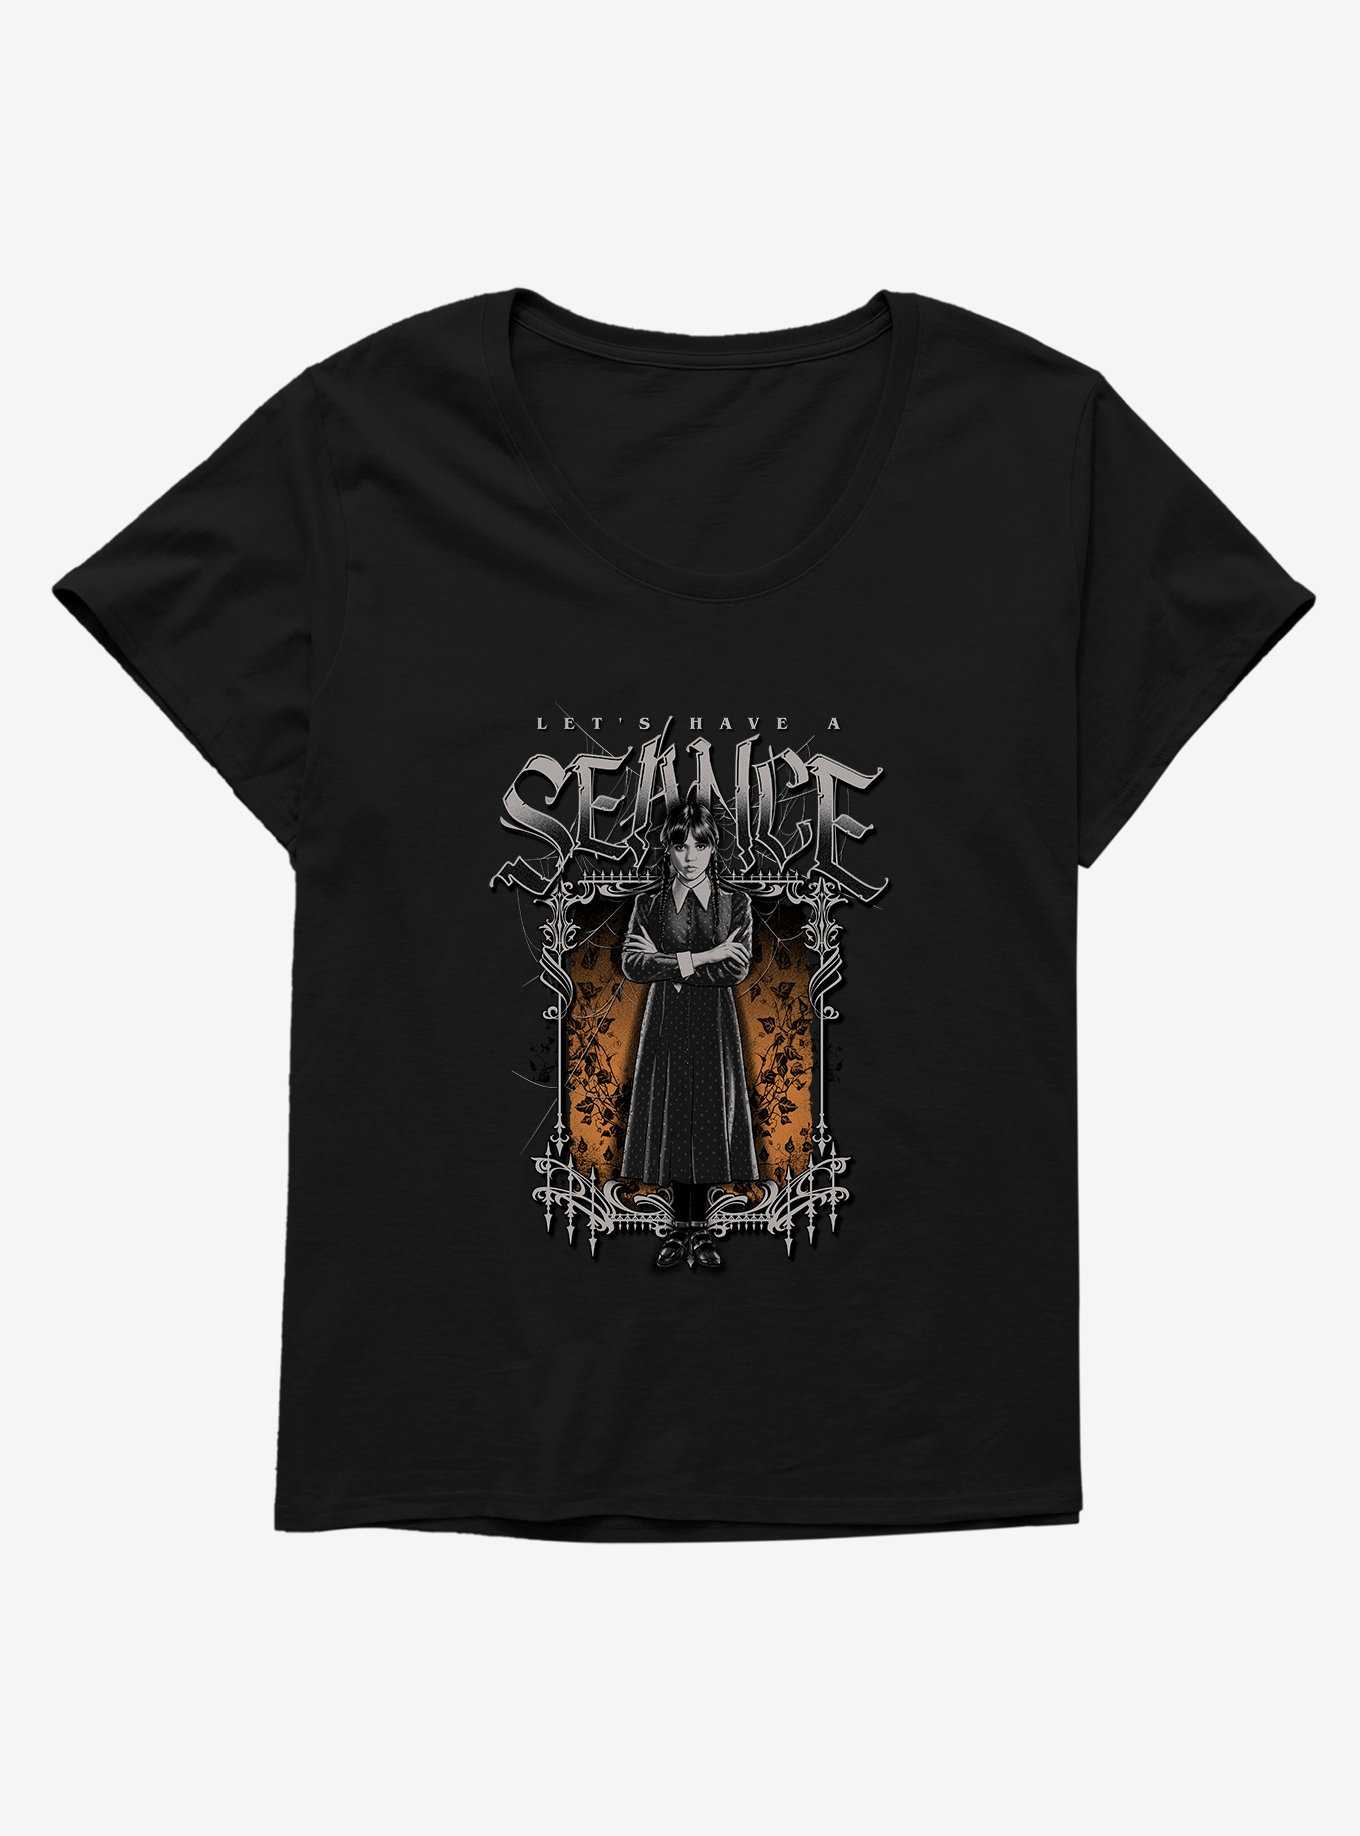 Wednesday Let's Have A Seance Womens T-Shirt Plus Size, , hi-res